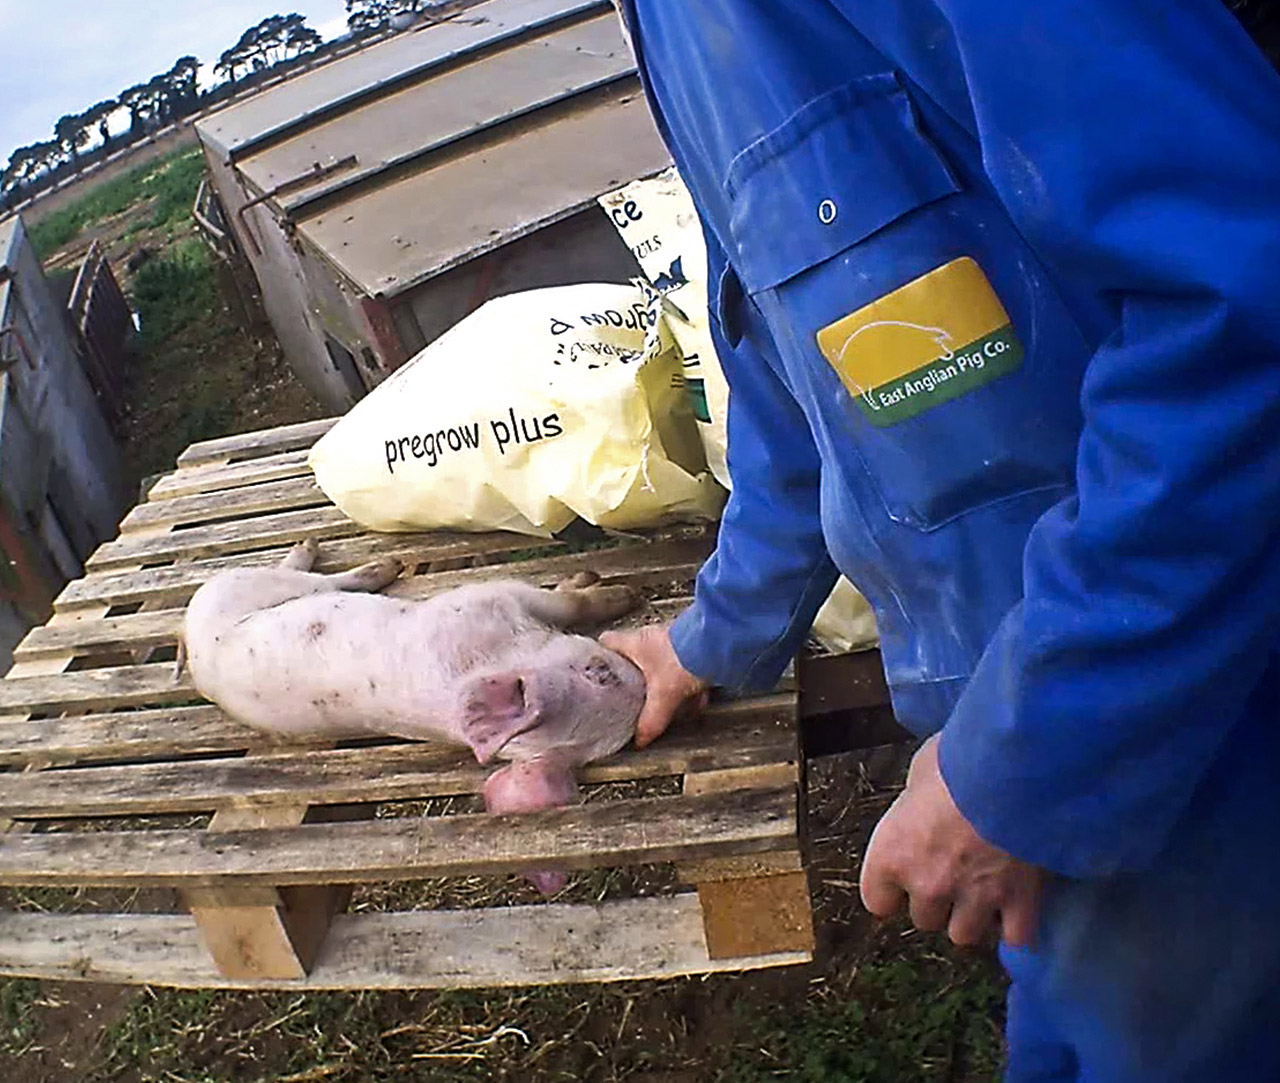 Worker asphyxiating a piglet